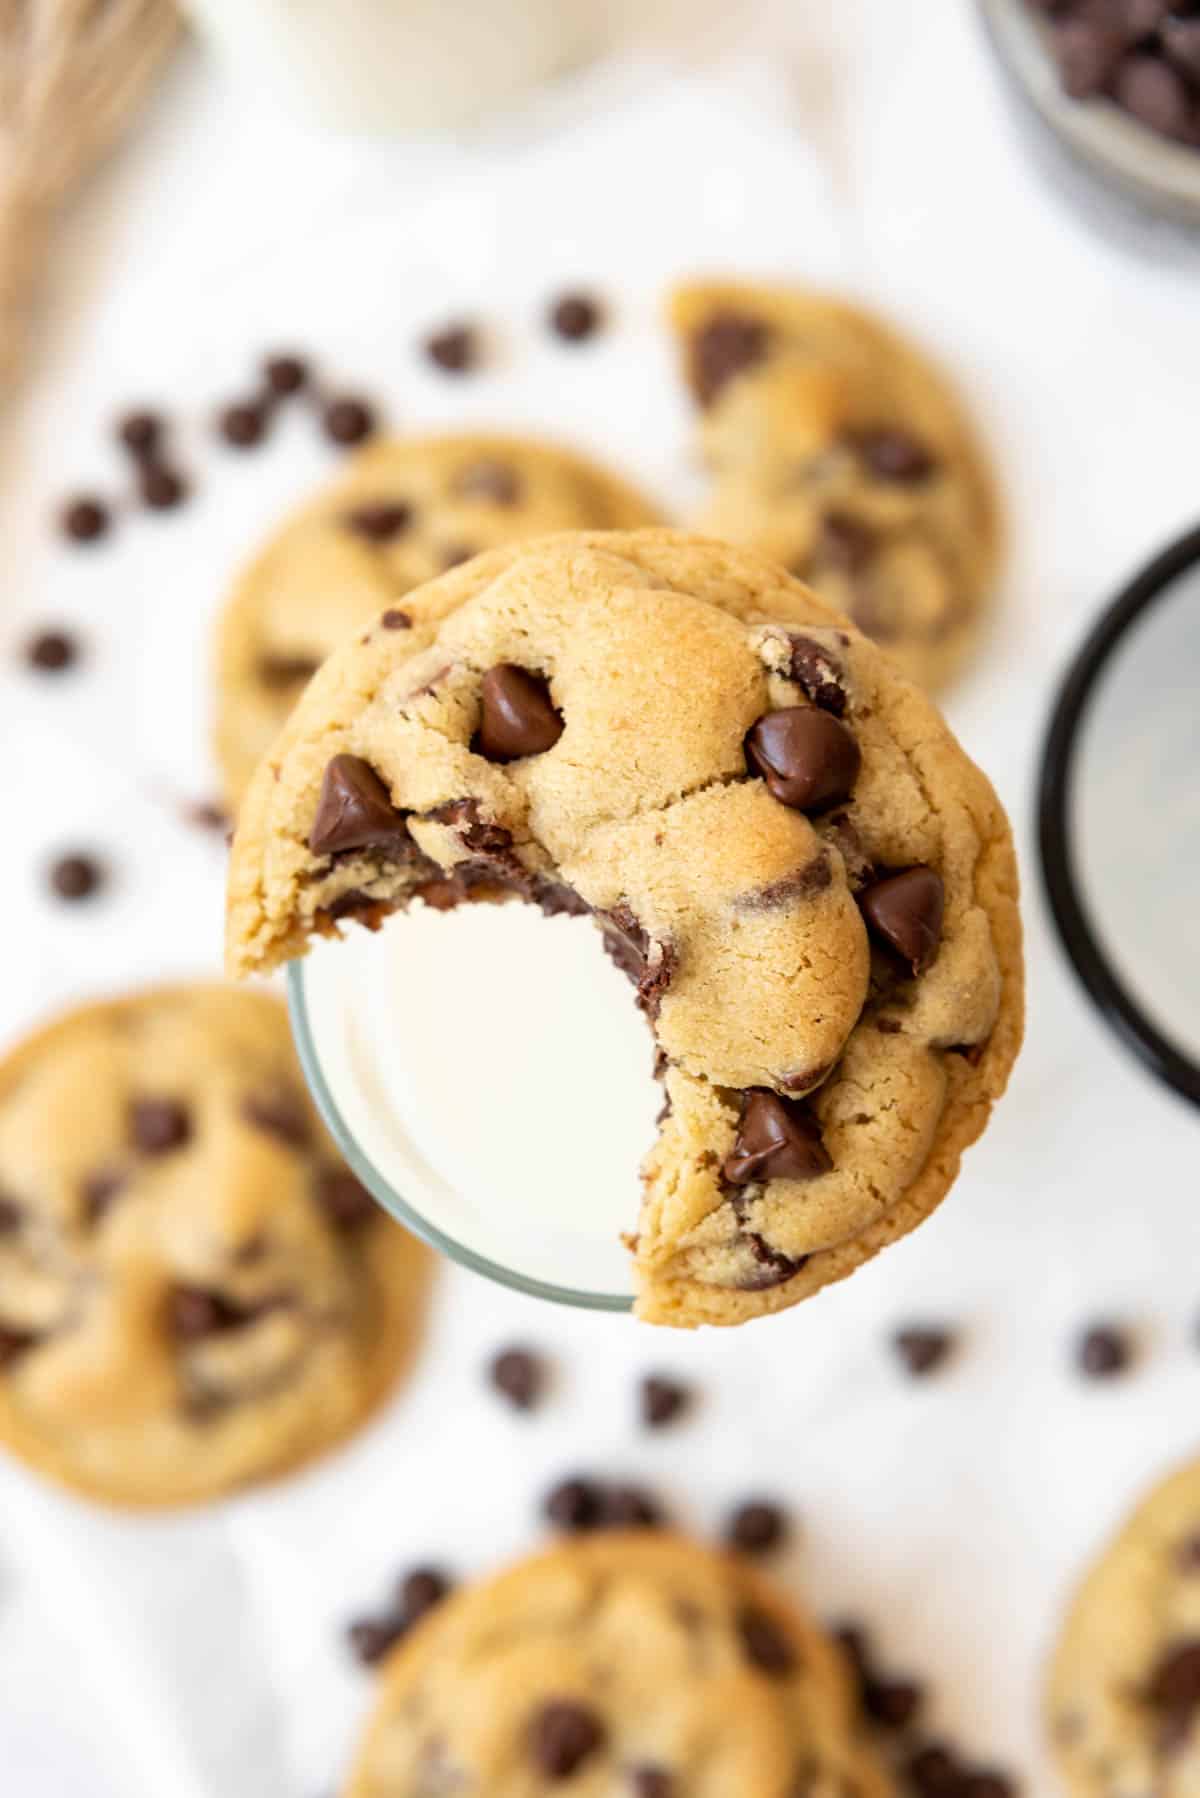 A chocolate chip cookie with a bite taken out of it balanced on the rim of a glass of milk.